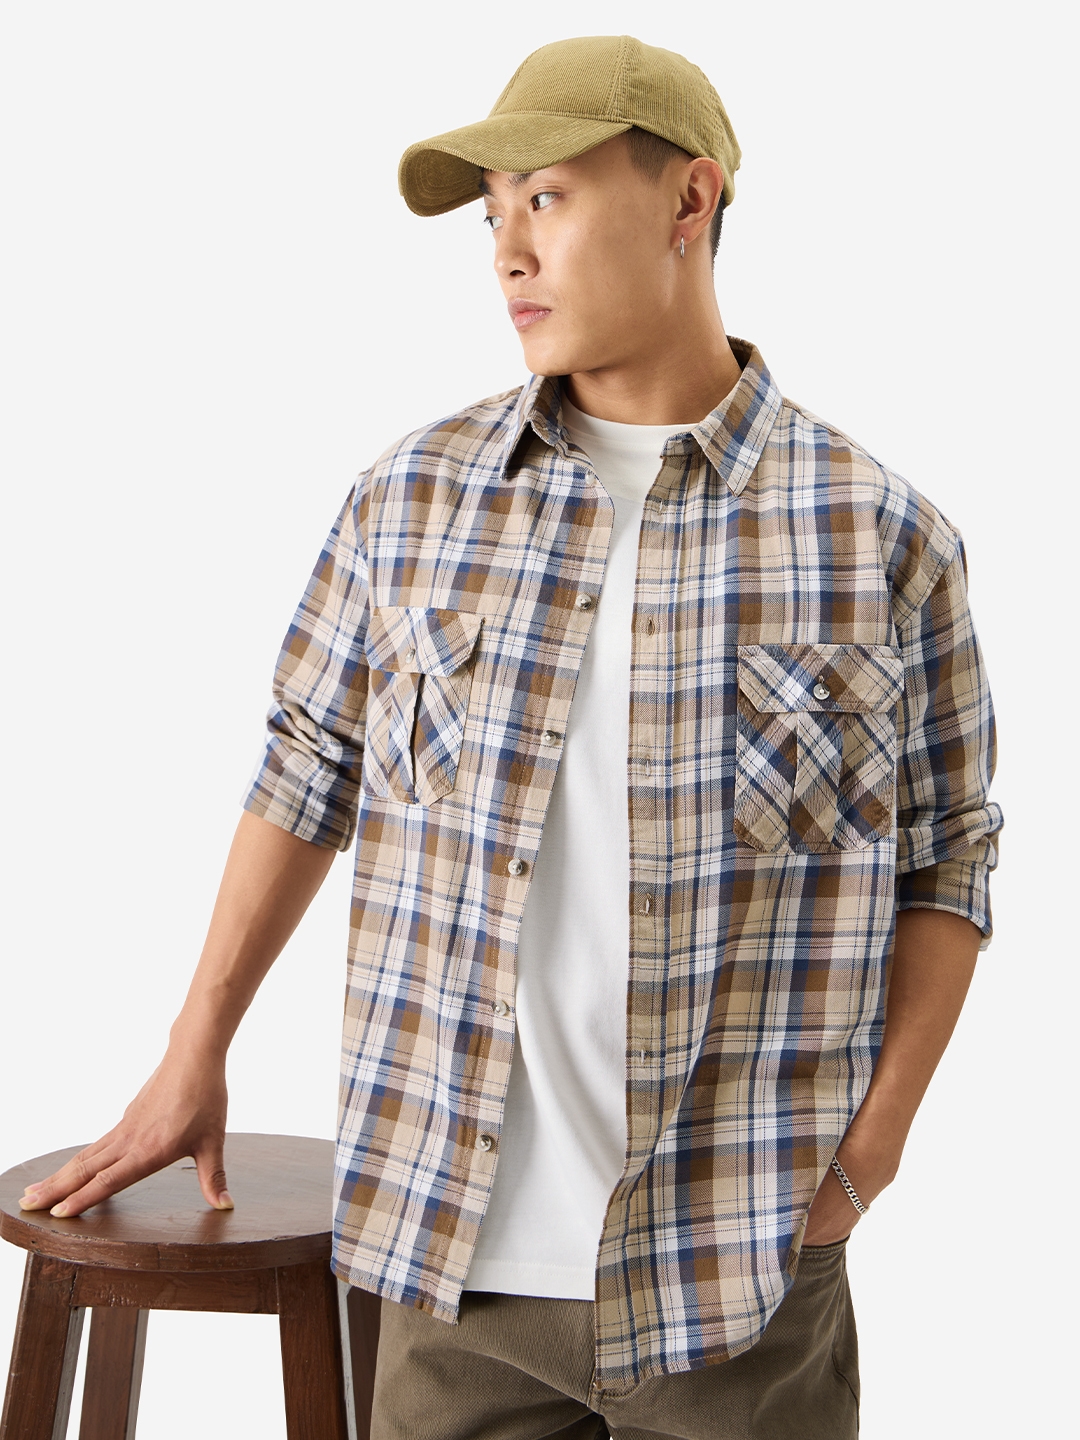 The Souled Store | Men's Plaid: Brown Bisque Men's Utility Shirts